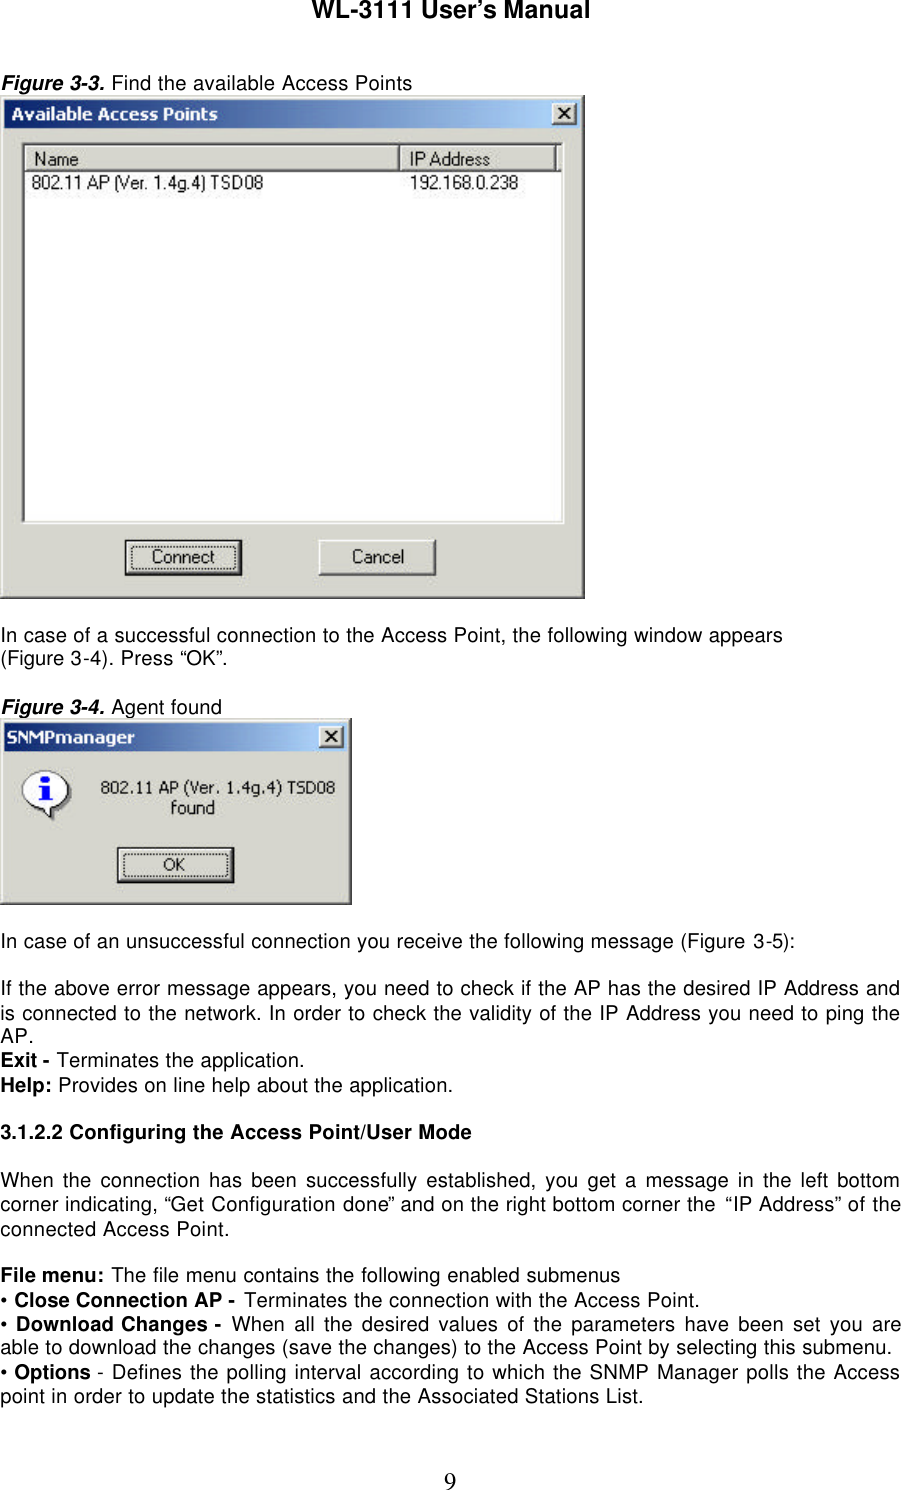 WL-3111 User’s Manual9Figure 3-3. Find the available Access PointsIn case of a successful connection to the Access Point, the following window appears(Figure 3-4). Press “OK”.Figure 3-4. Agent foundIn case of an unsuccessful connection you receive the following message (Figure 3-5):If the above error message appears, you need to check if the AP has the desired IP Address andis connected to the network. In order to check the validity of the IP Address you need to ping theAP.Exit - Terminates the application.Help: Provides on line help about the application.3.1.2.2 Configuring the Access Point/User ModeWhen the connection has been successfully established, you get a message in the left bottomcorner indicating, “Get Configuration done” and on the right bottom corner the “IP Address” of theconnected Access Point.File menu: The file menu contains the following enabled submenus• Close Connection AP - Terminates the connection with the Access Point.• Download Changes - When all the desired values of the parameters have been set you areable to download the changes (save the changes) to the Access Point by selecting this submenu.• Options  - Defines the polling interval according to which the SNMP Manager polls the Accesspoint in order to update the statistics and the Associated Stations List.